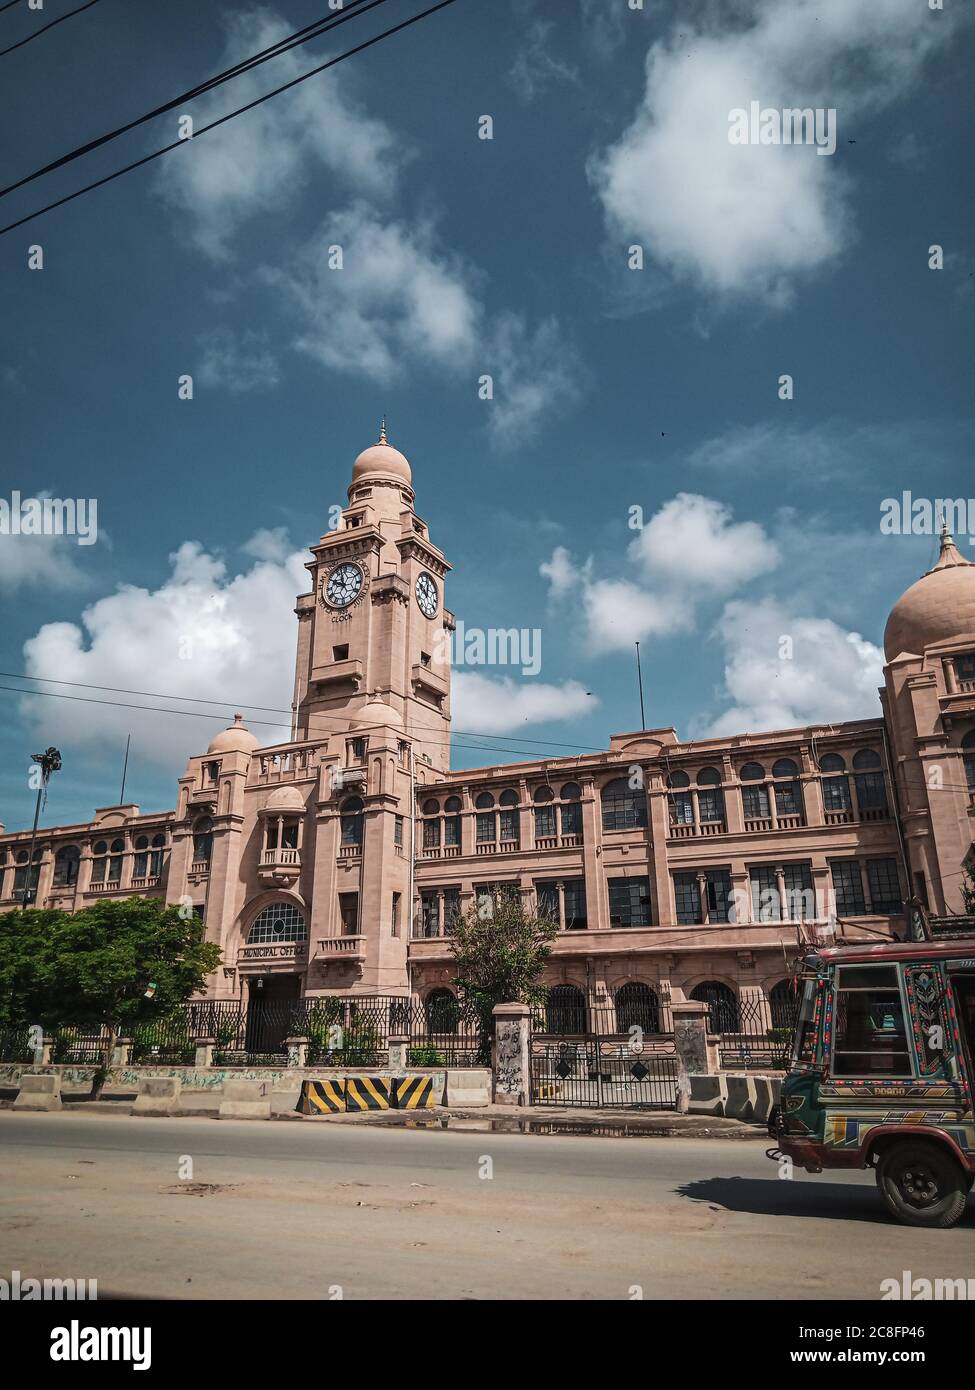 Very old and historical places in Karachi Pakistan Stock Photo